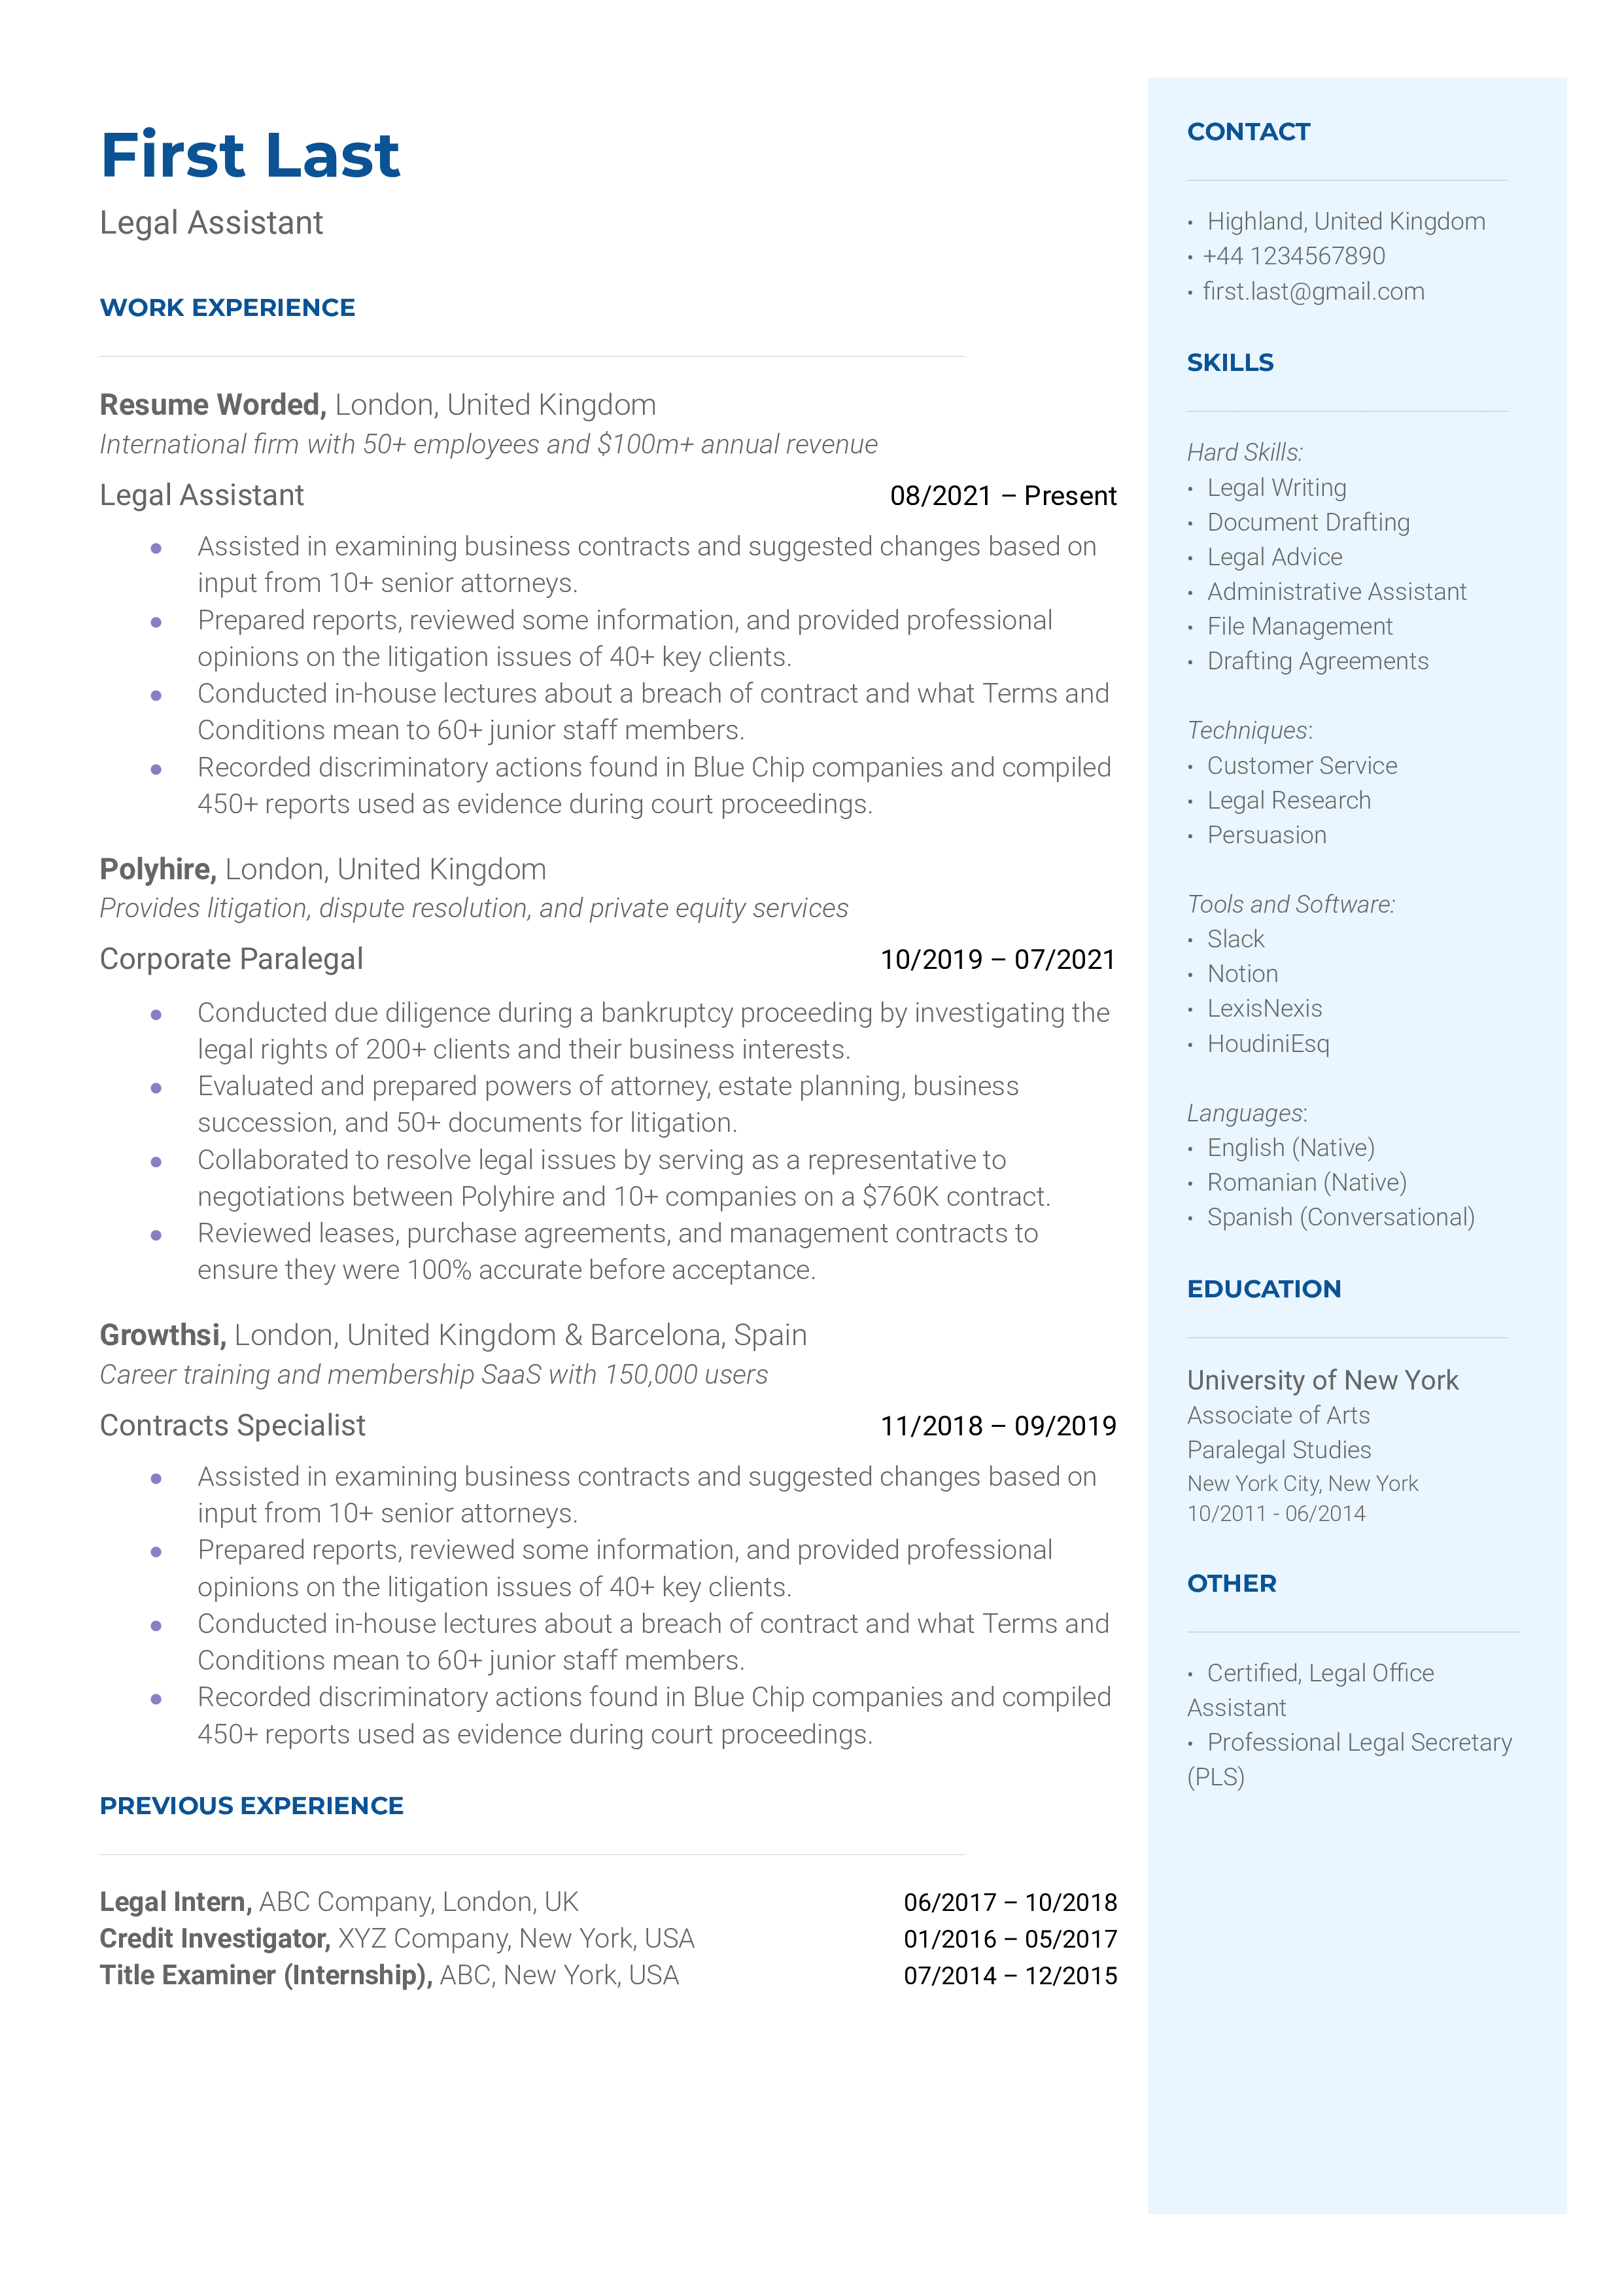 Resume example for a legal assistant job application